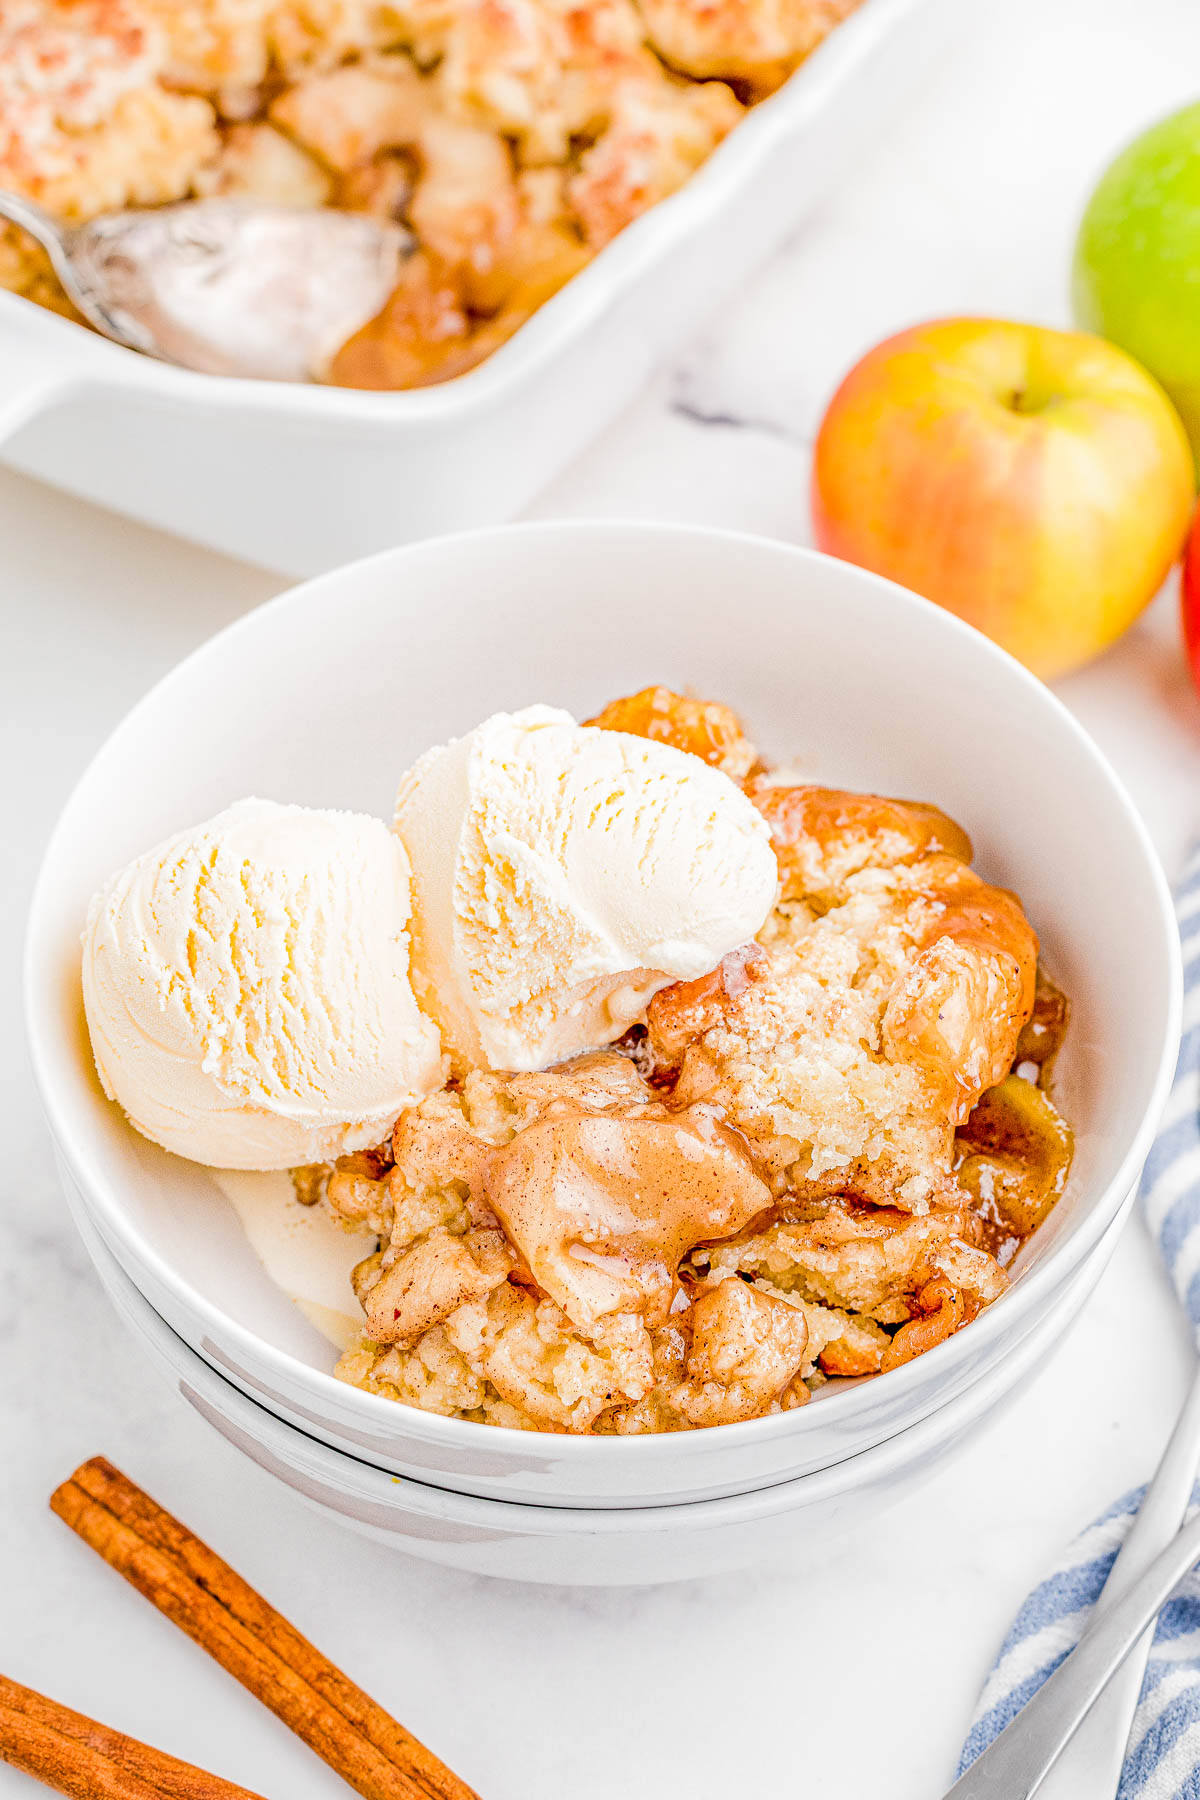 Easy Apple Cobbler — A spiced apple filling is topped with a sweet biscuit topping before being baked to golden brown and bubbly perfection! Apple cobbler is such an EASY dessert to make and tastes even better when drizzled with caramel sauce and served with a scoop of ice cream! 